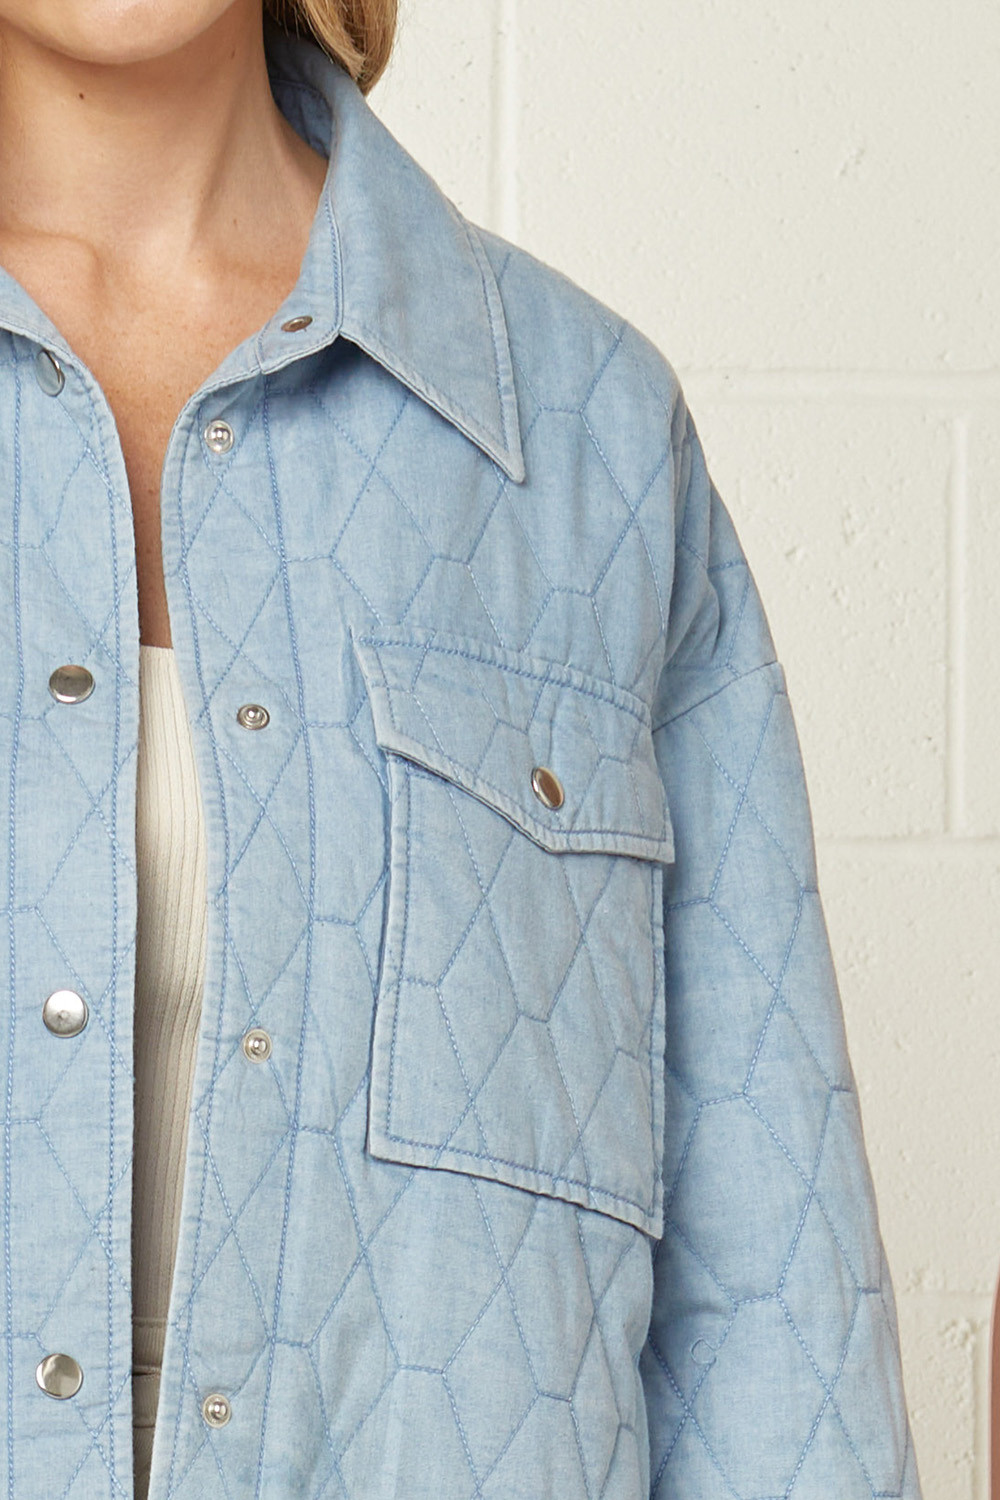 Hex Quilted Jacket, Blue